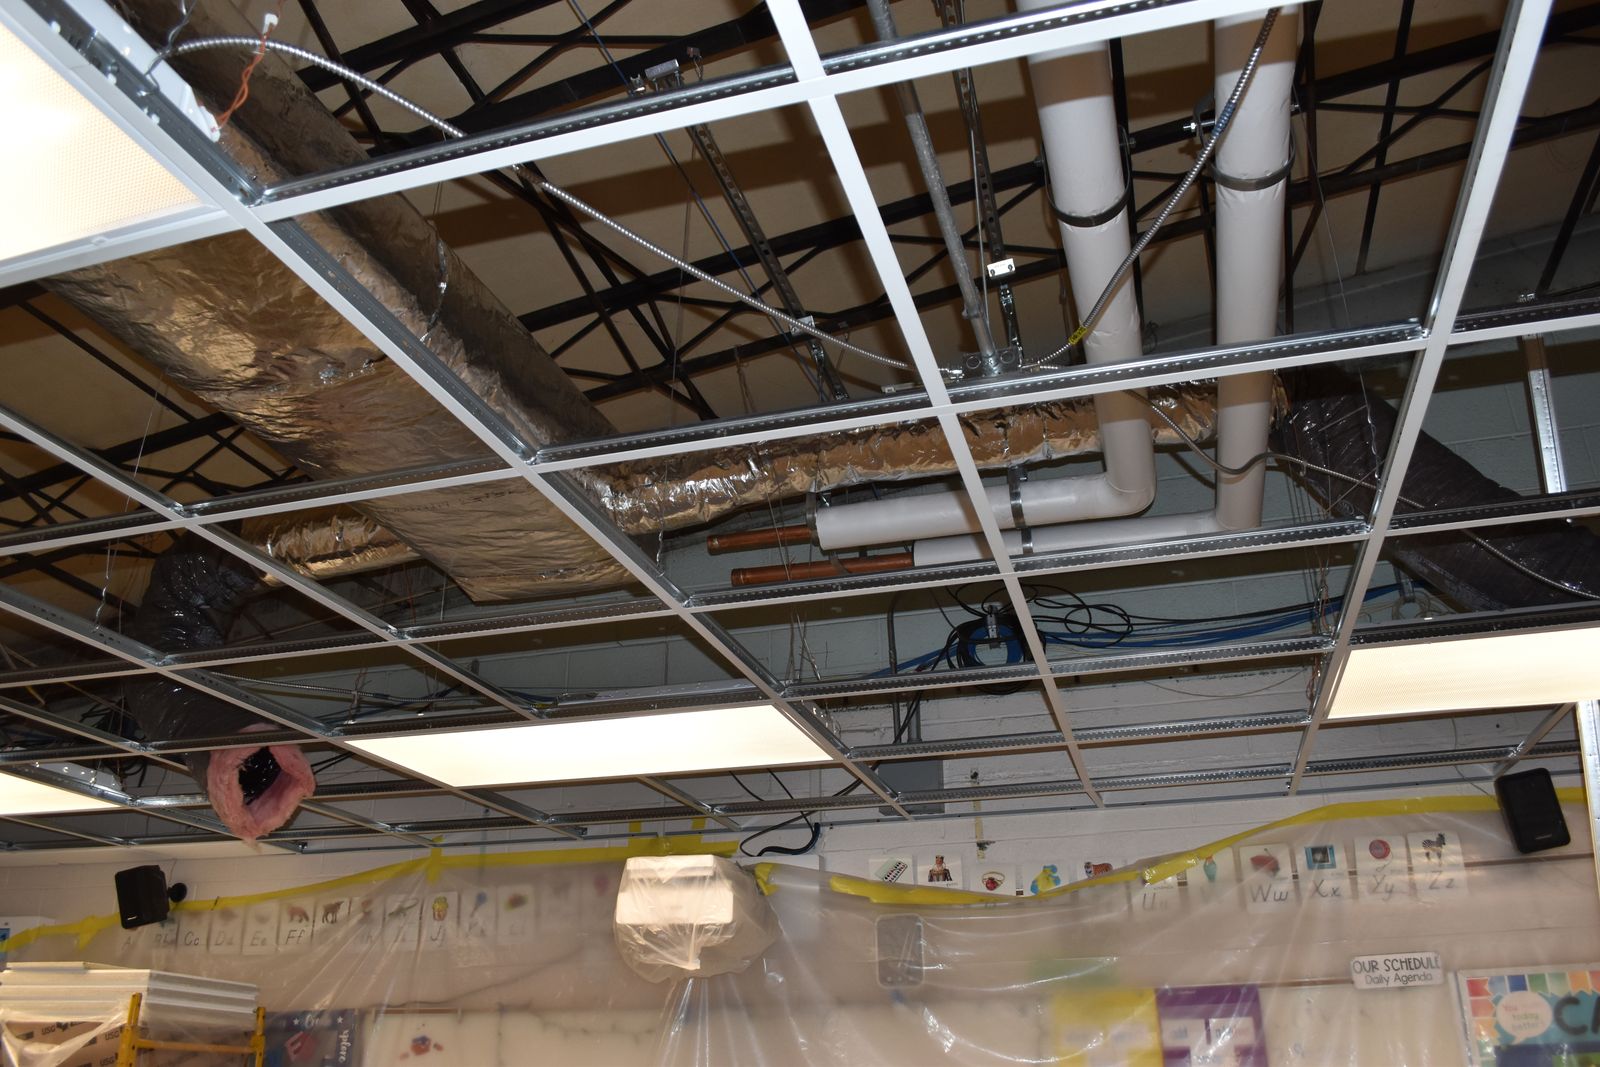 An exposed school classroom ceiling showing snow copper tubing for HVAC.